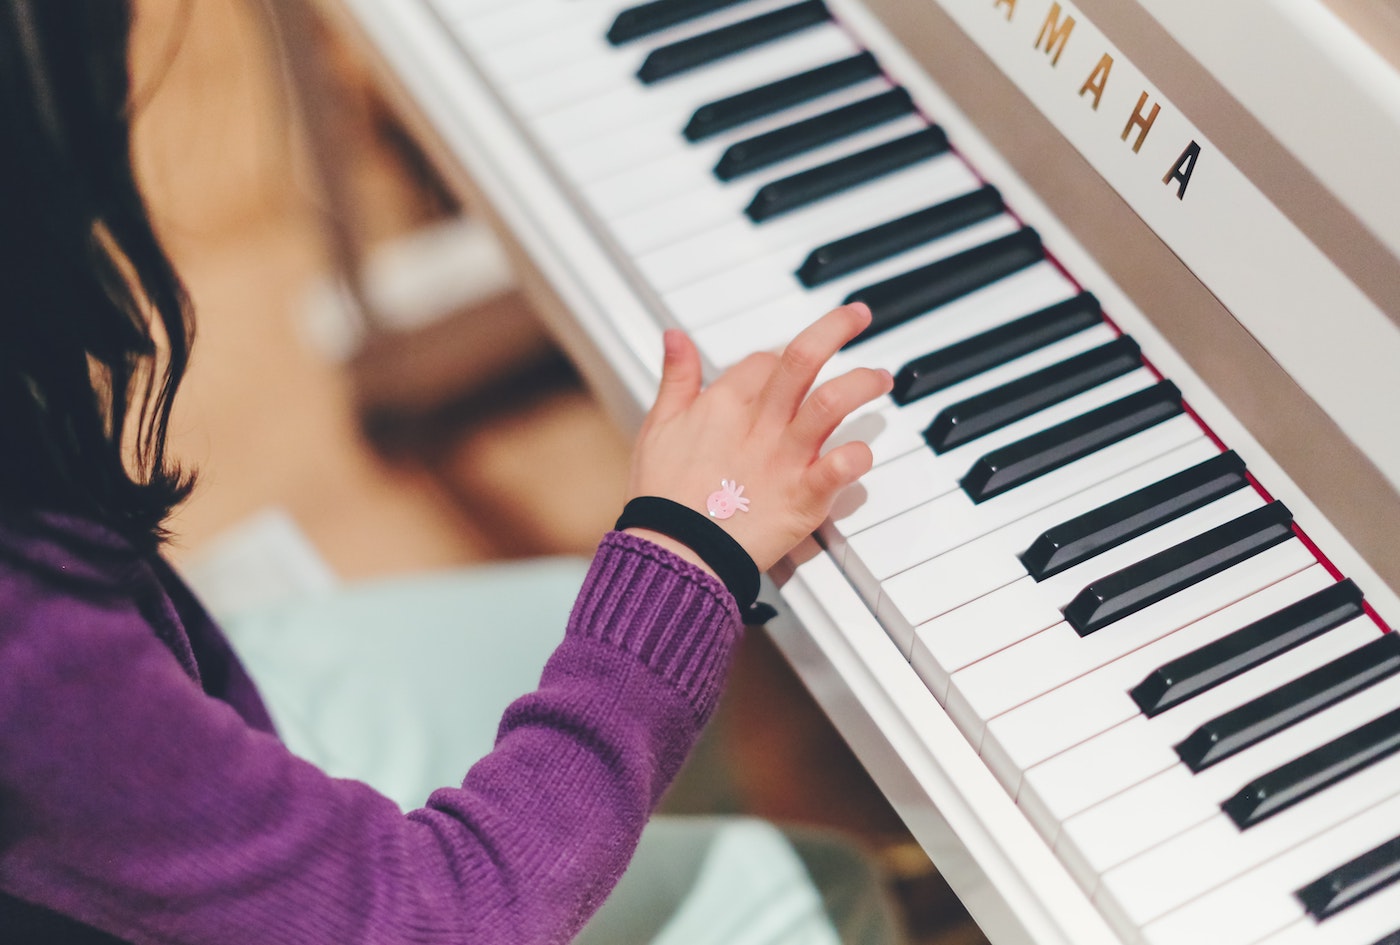 Girl playing the piano